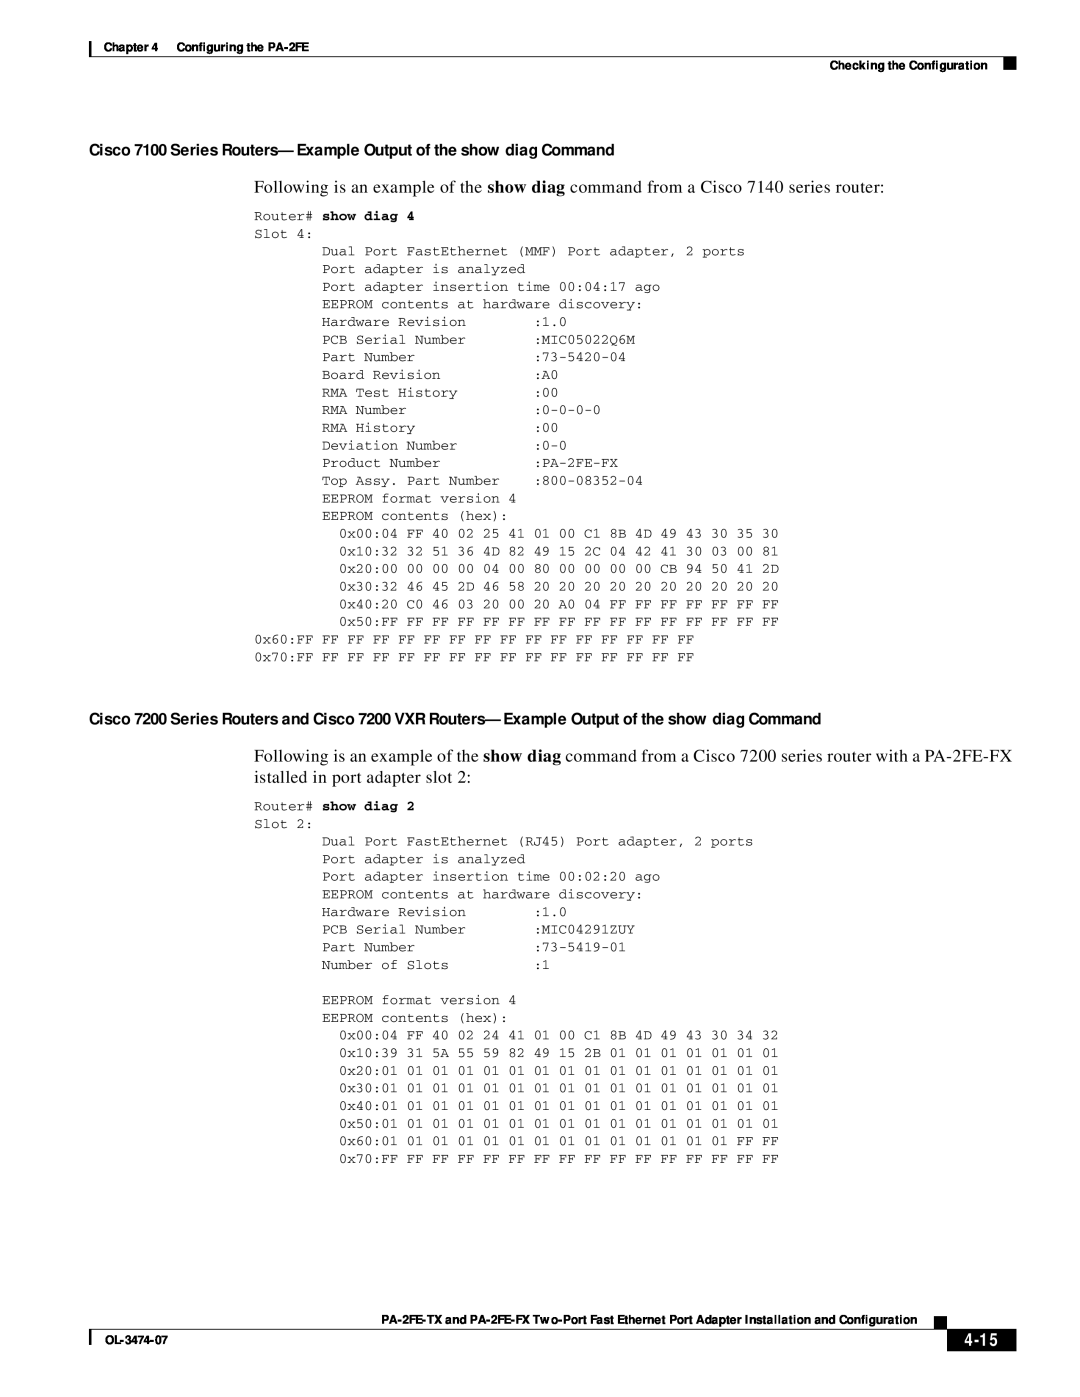 Cisco Systems PA-2FE-FX, PA-2FE-TX manual Cisco 7100 Series Routers-Example Output of the show diag Command, 4-15 